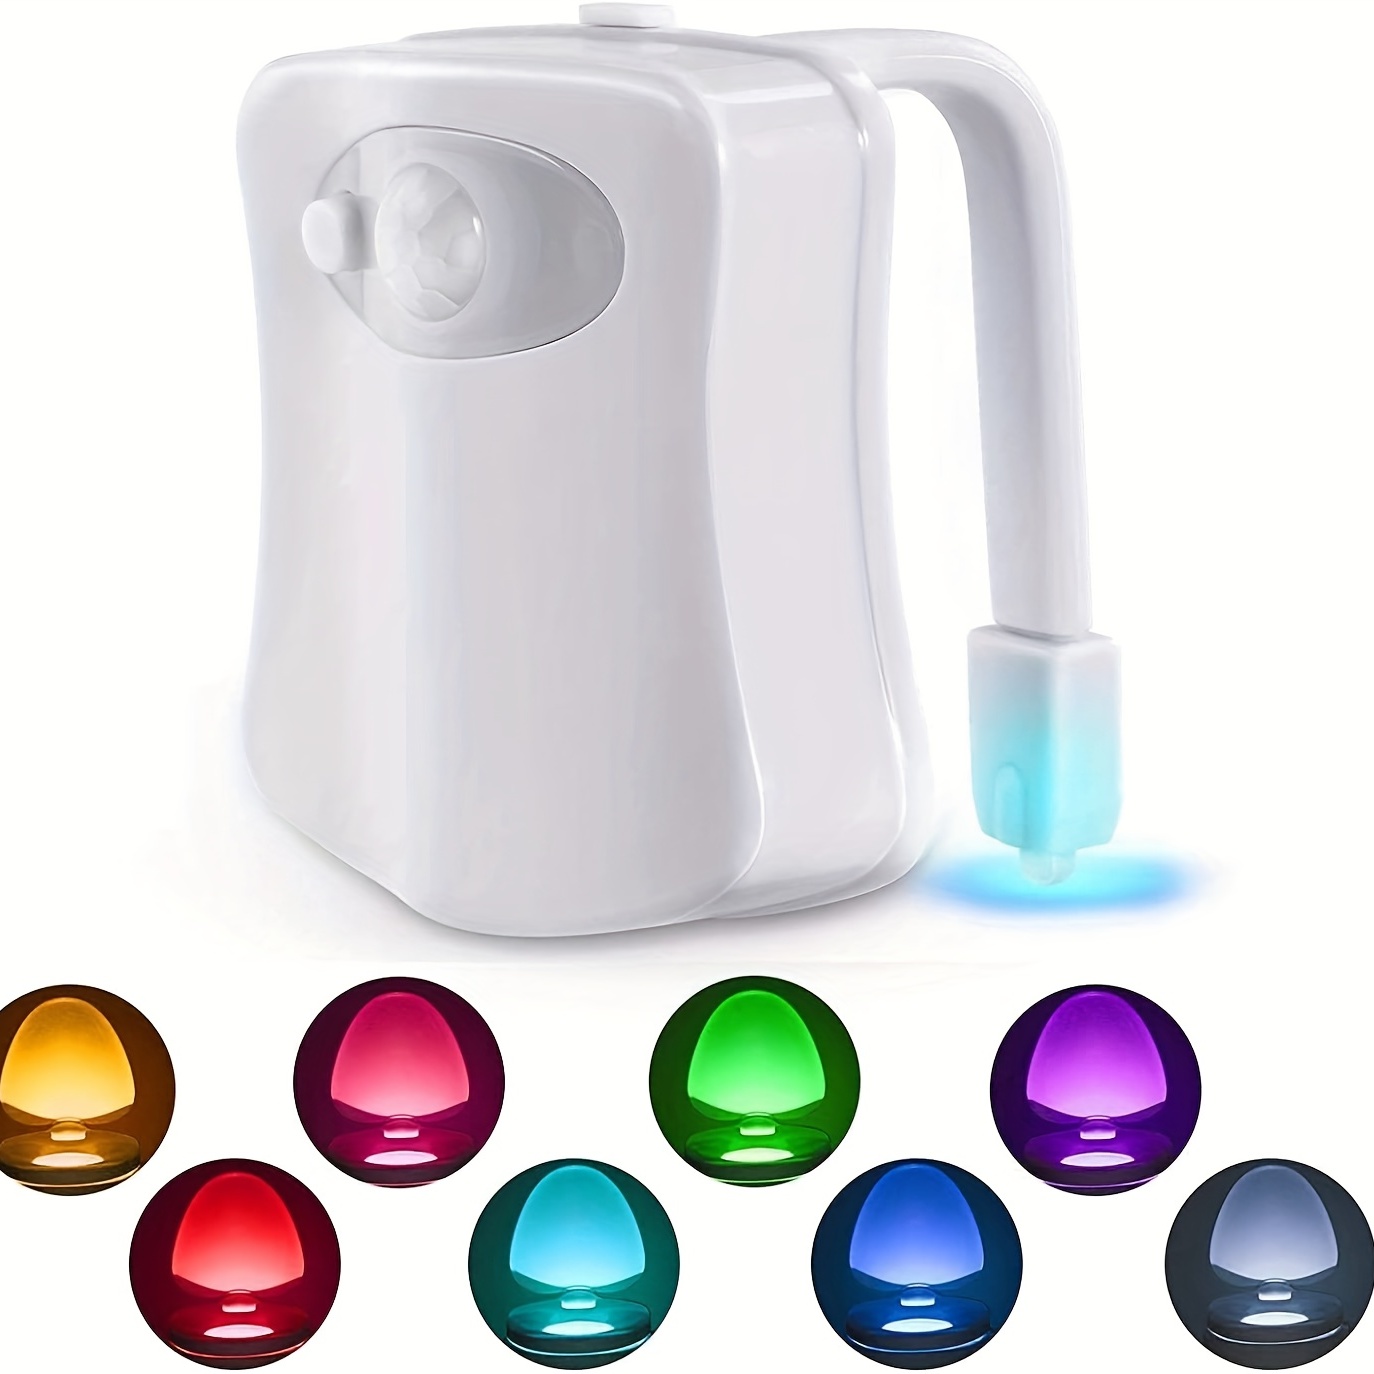 🌈 Vintar 16 Colour LED Toilet Night Light Motion Activated Review